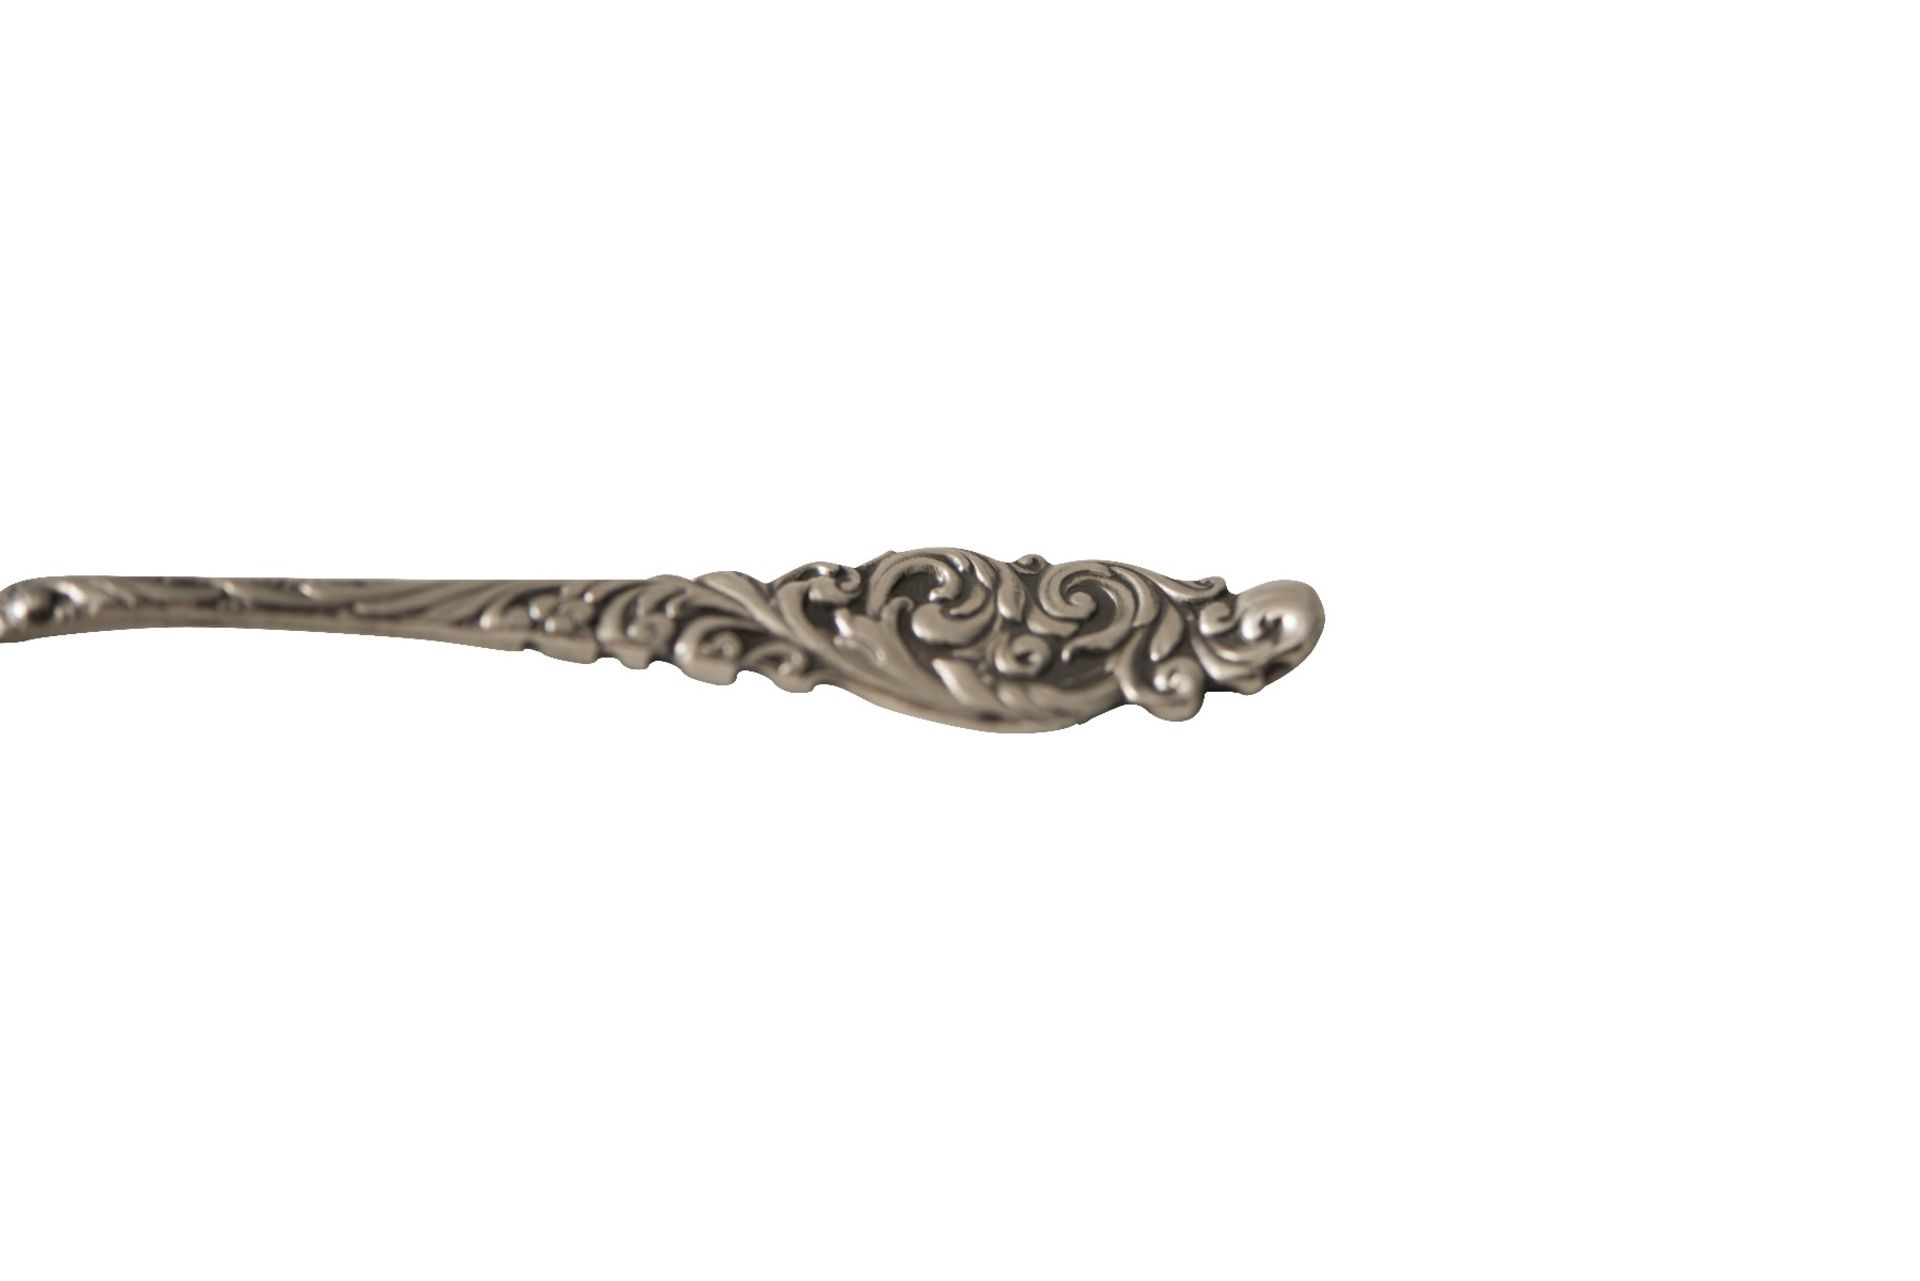 Coffee spoon with decorated handles - Image 7 of 8